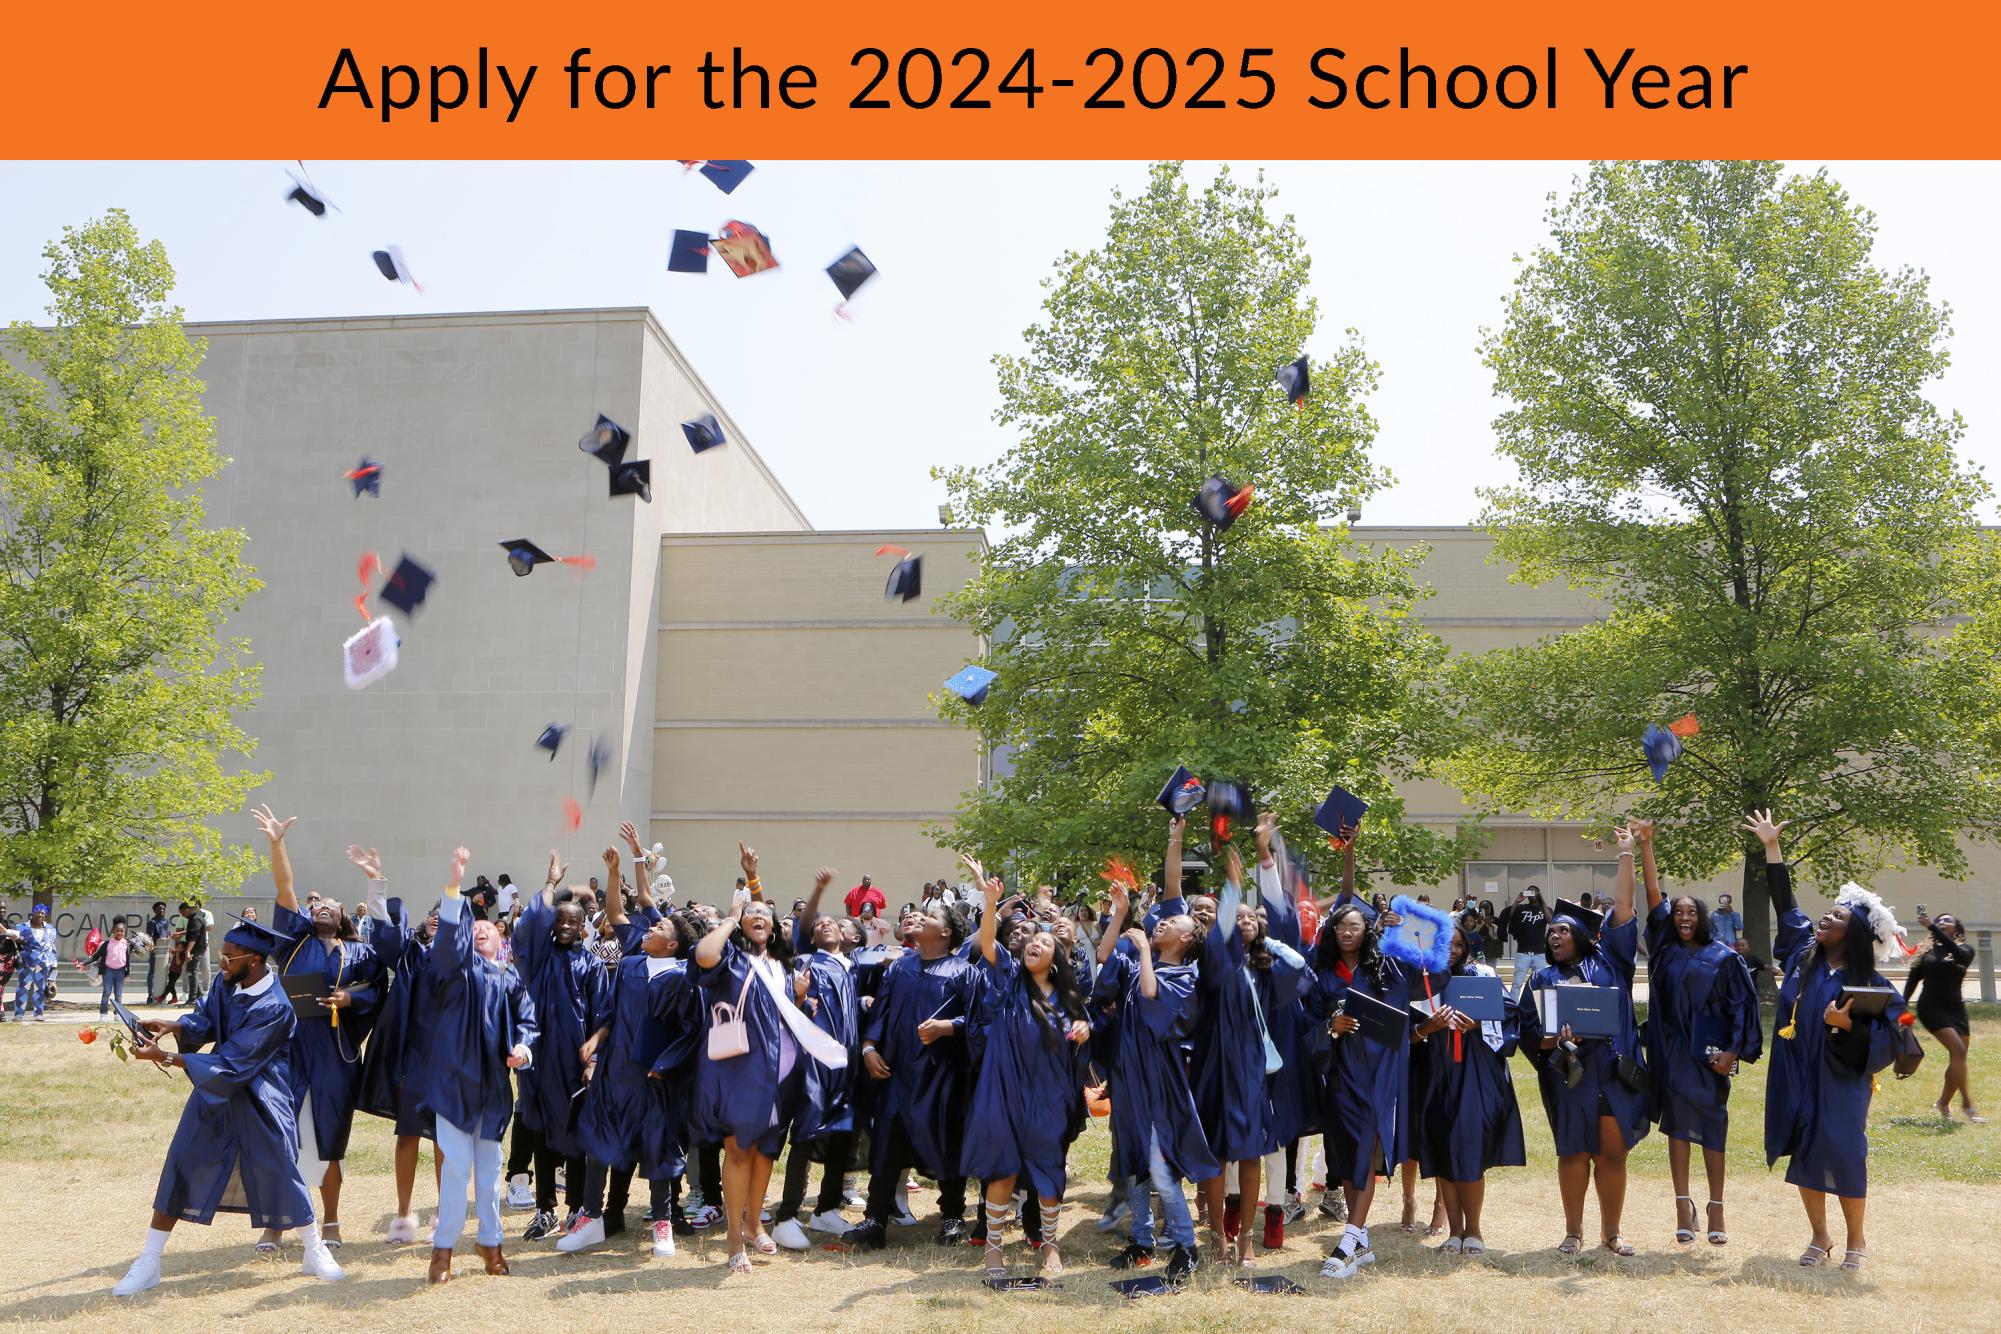 Apply Now for the 2024-2025 School Year